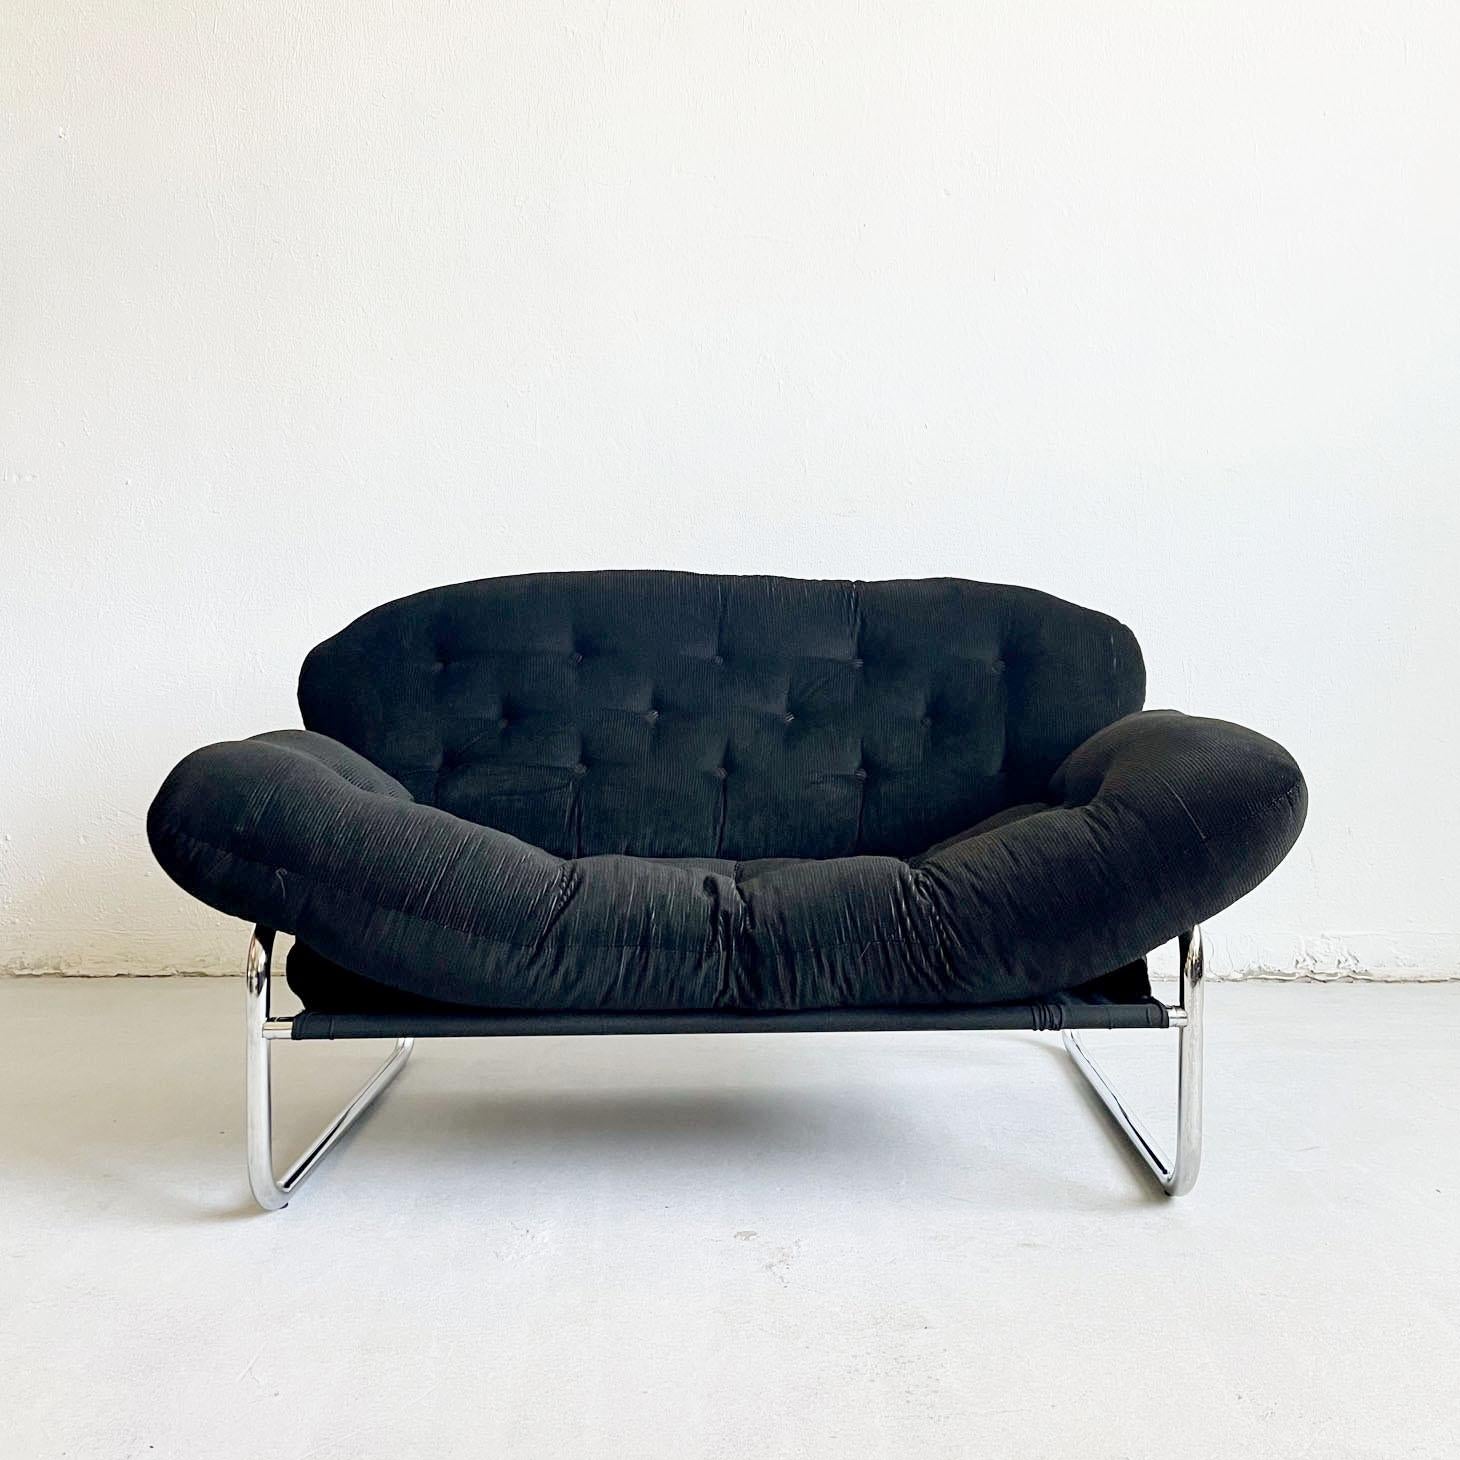 2-Seater Sofa, Loveseat, Swed Form, Sweden 1970s, by Johan Bertil Häggström In Good Condition For Sale In Zagreb, HR